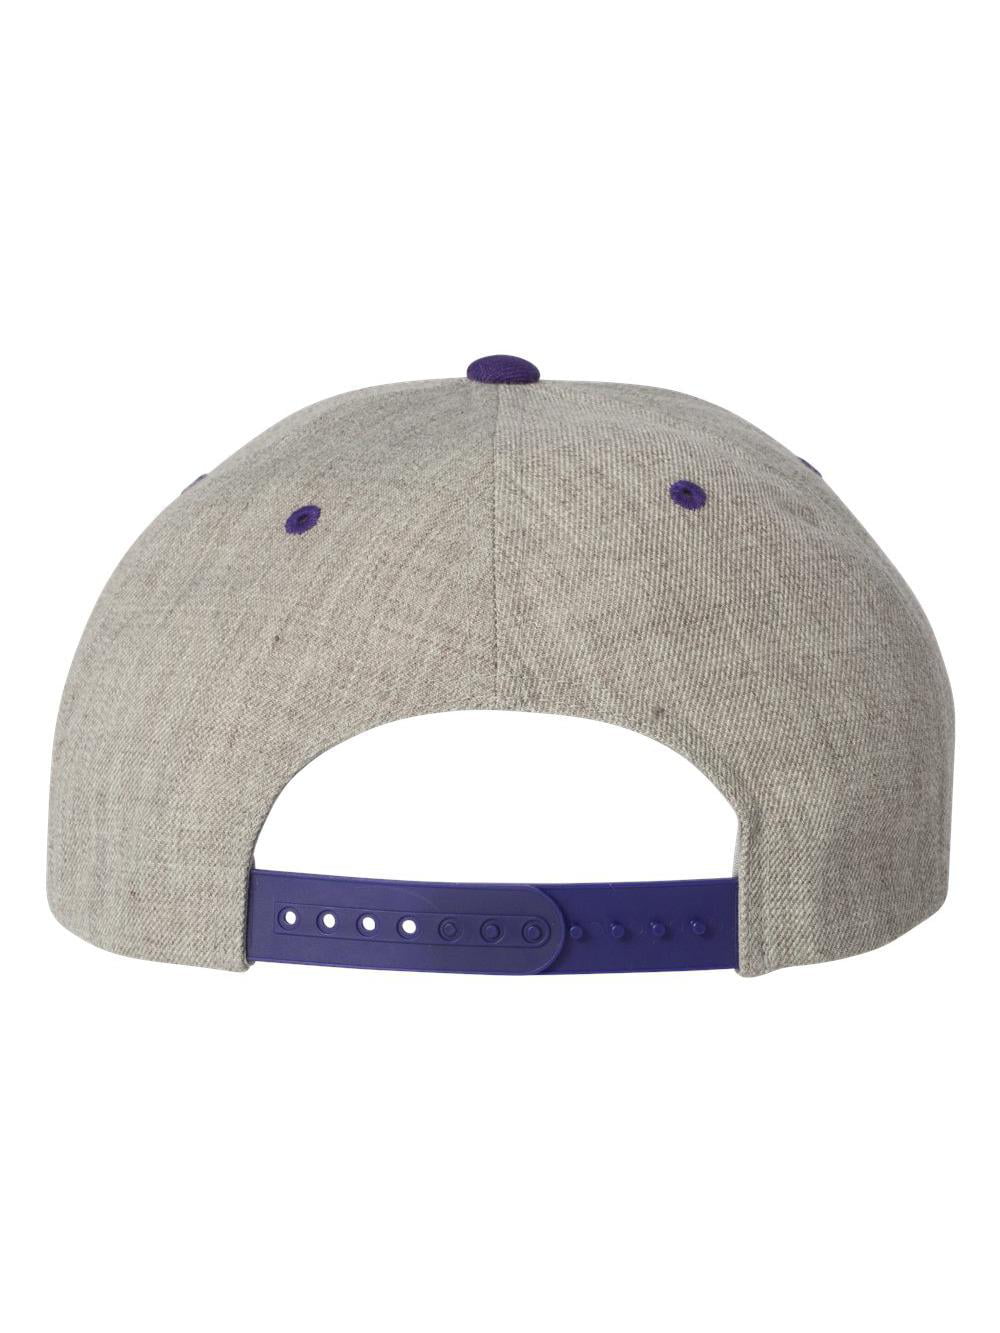 Yupoong Heather Two-Tone Adjustable Wool Cap